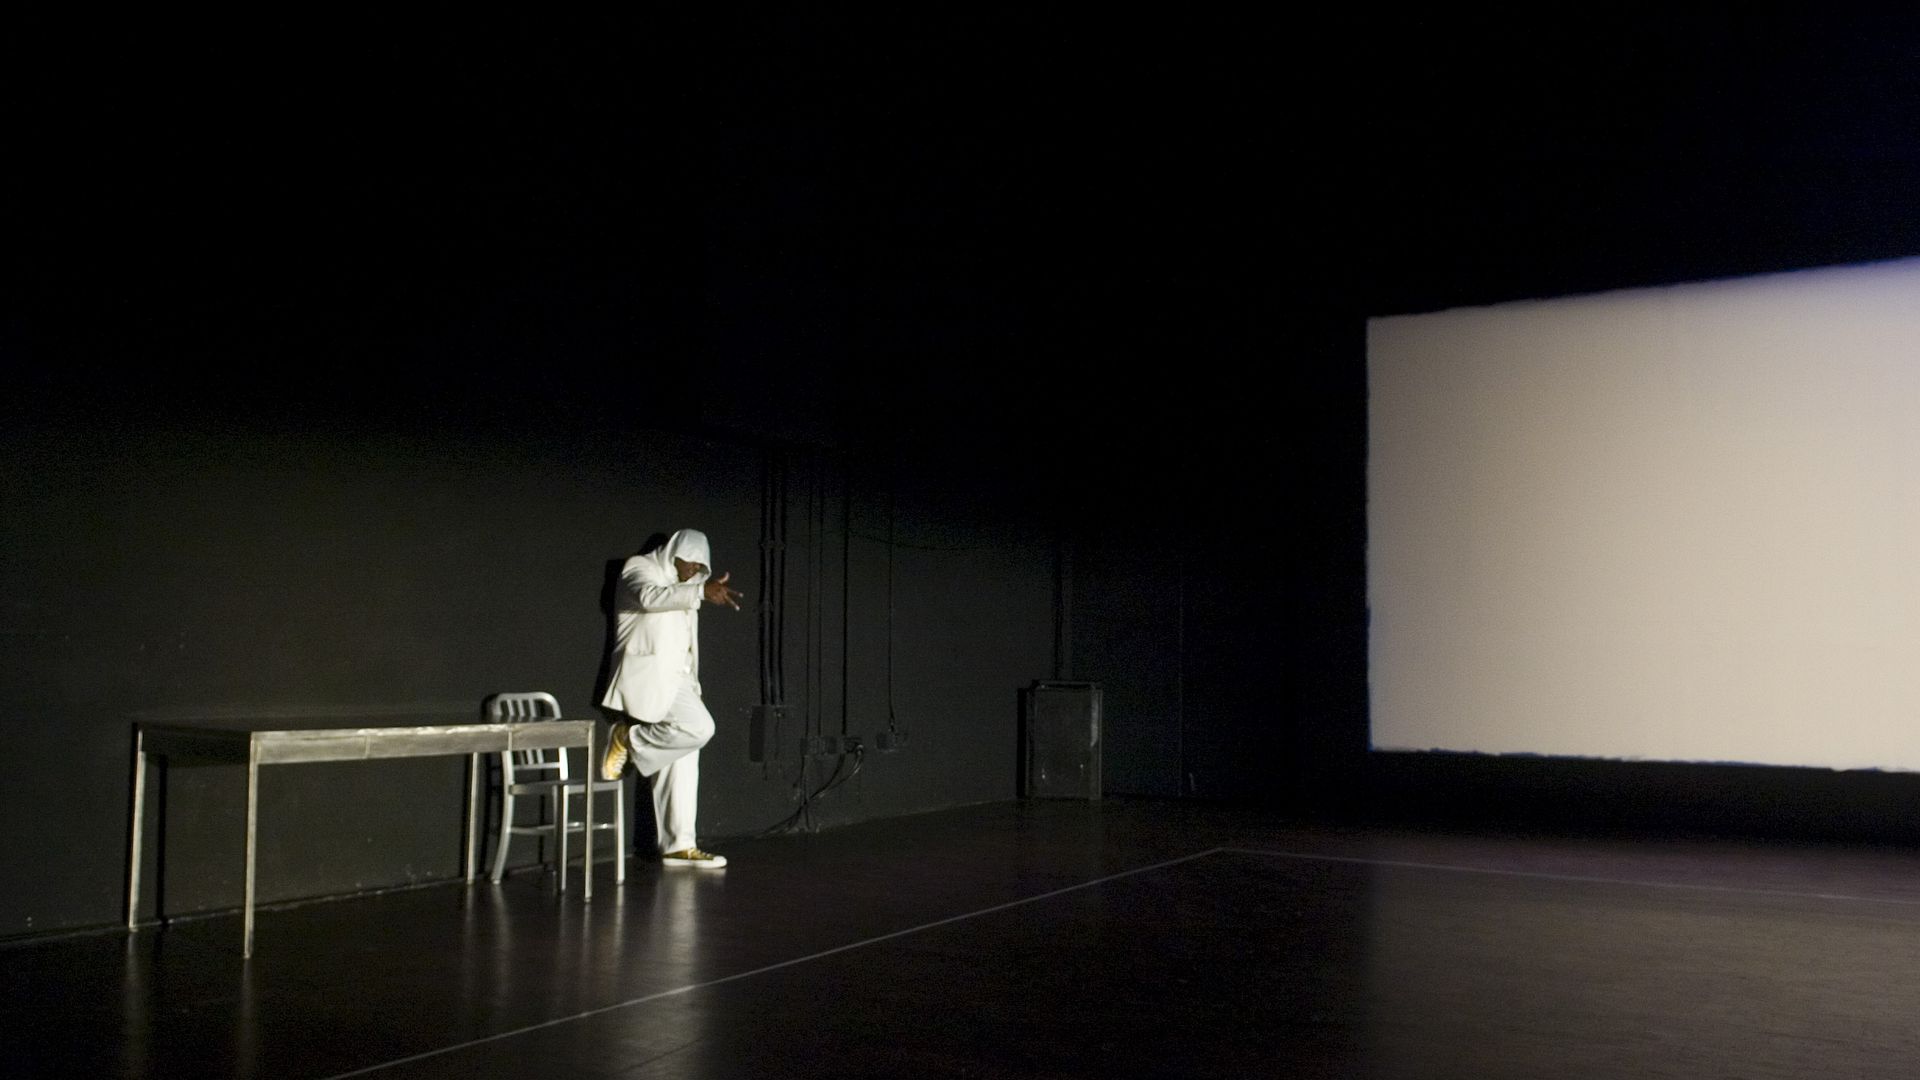 A man wearing all white leans against a table near a big blank screen in a black room